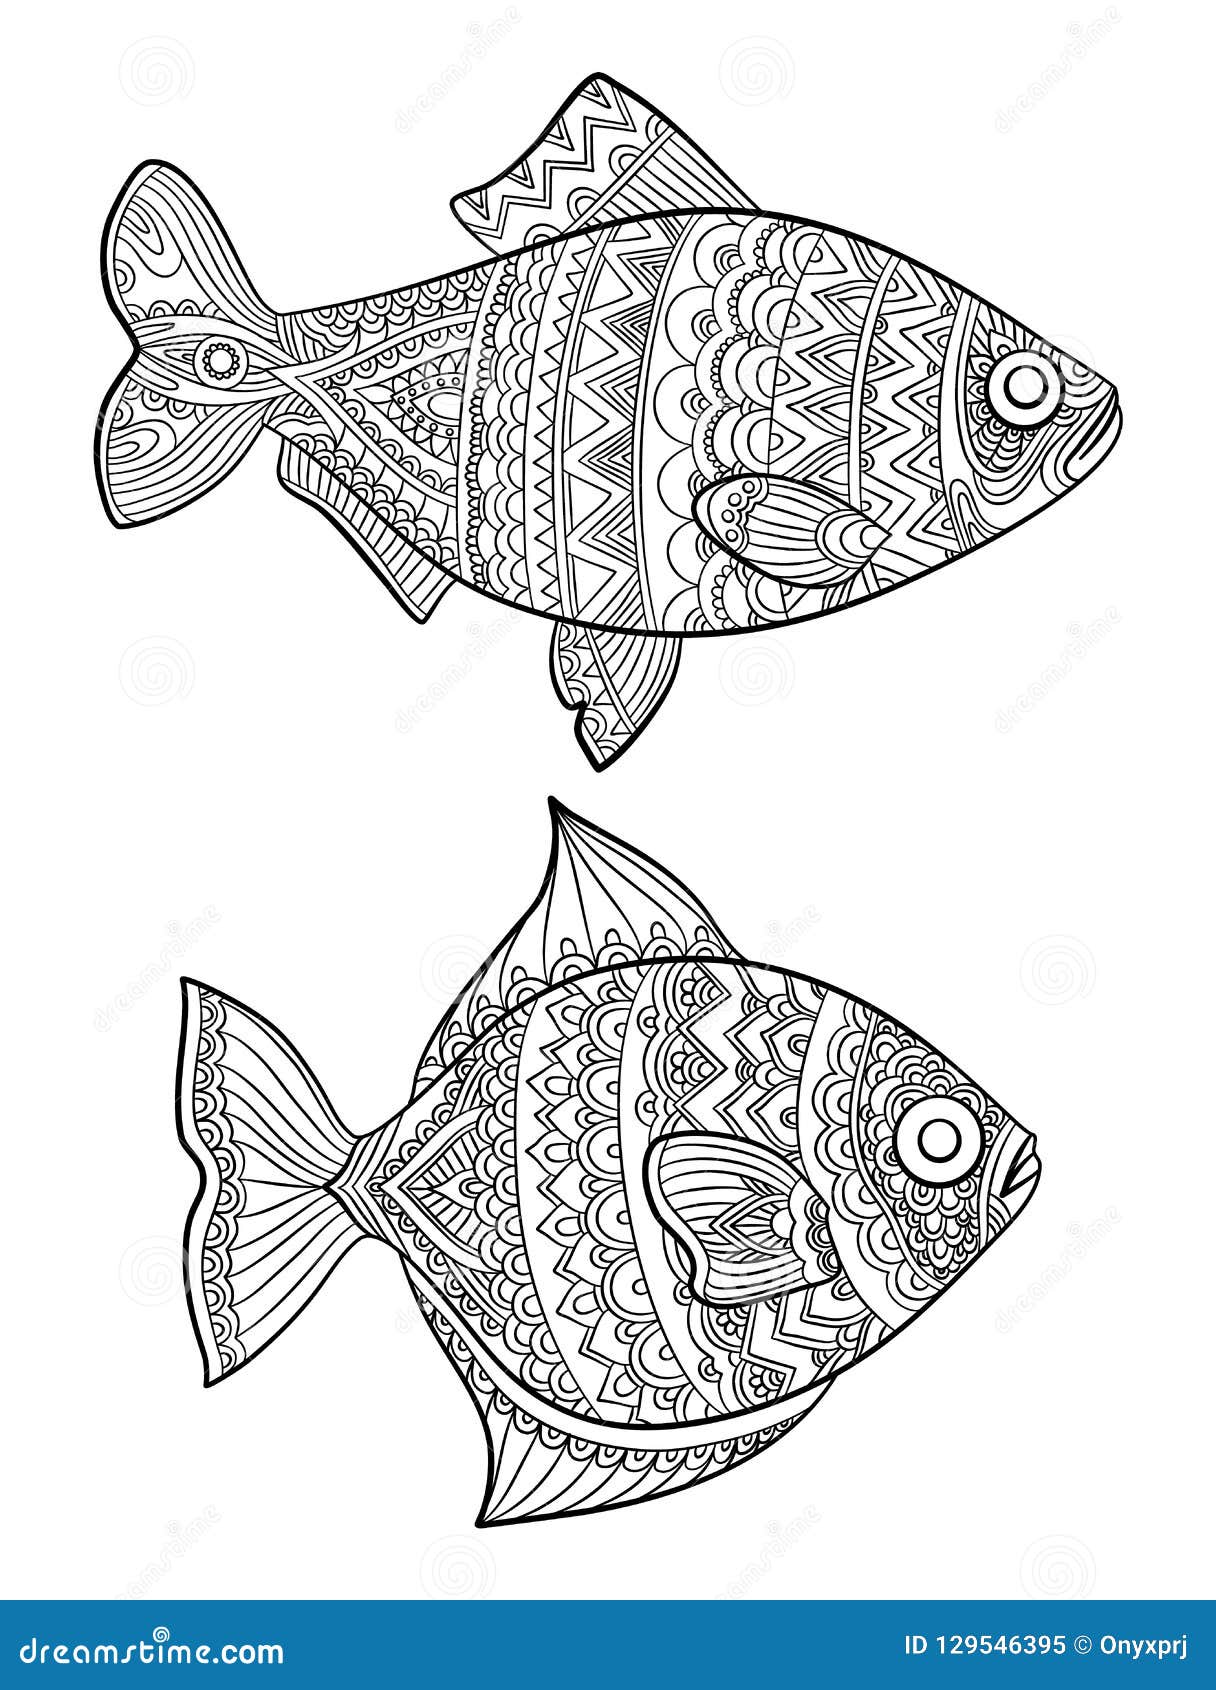 Fish Coloring Pages. Fashion Drawing Ocean Animals Drawings For Adults